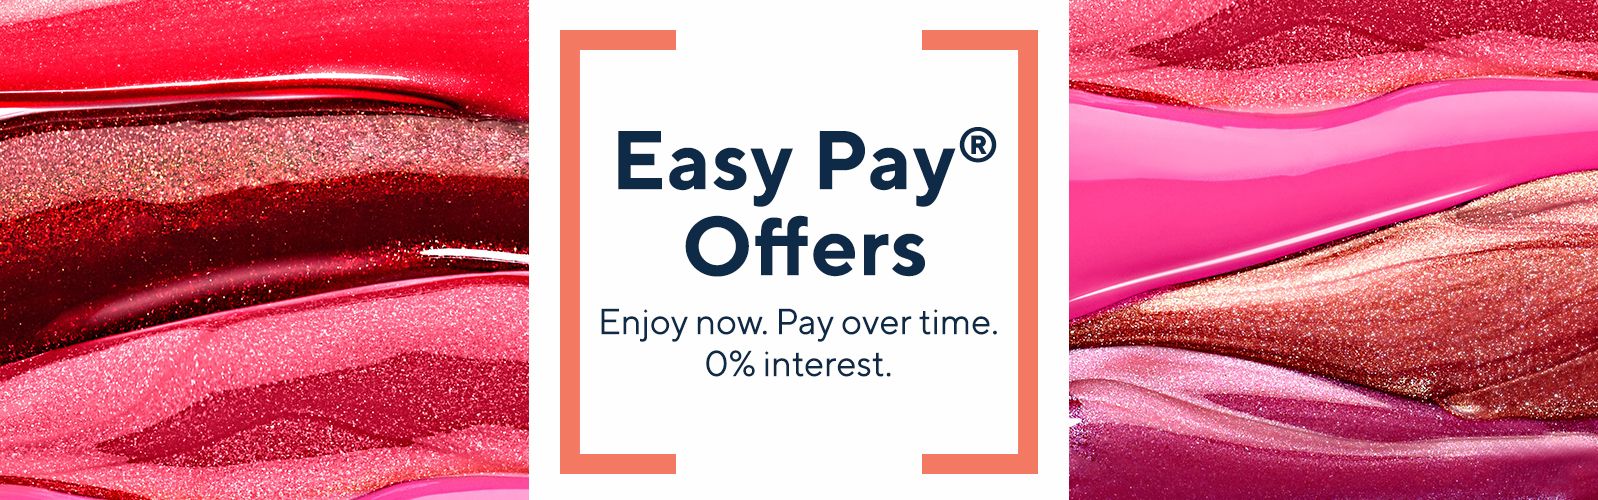 Easy Pay® Offers - Enjoy now. Pay over time. 0% interest. 